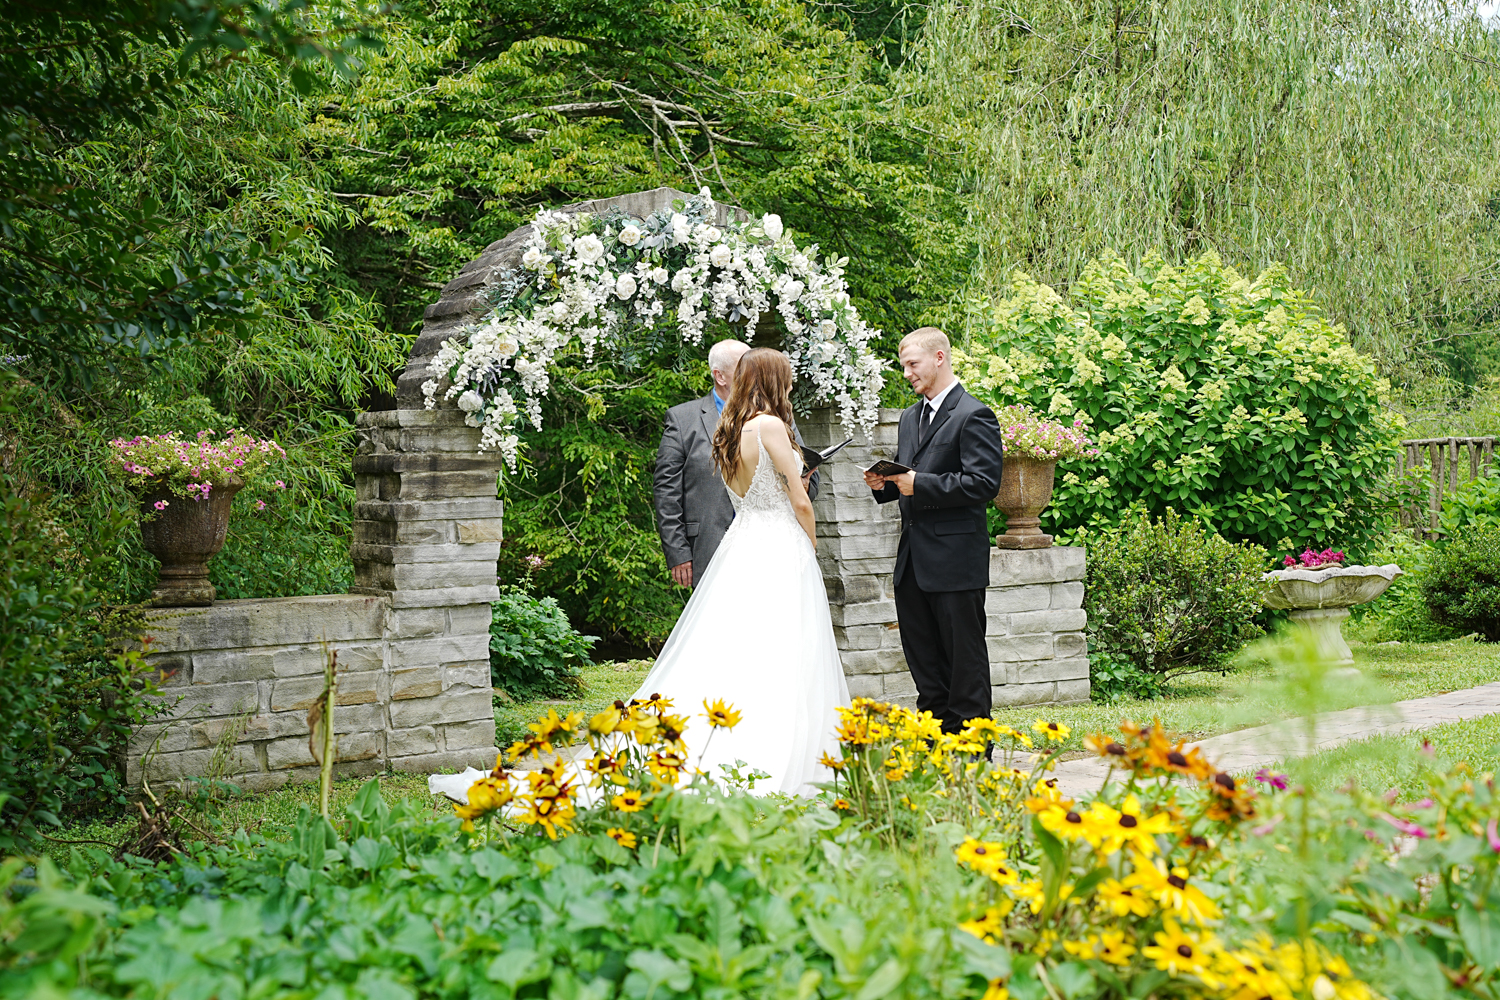 Micro wedding ceremony at a stone arch decorated with white flowers in a summer garden with blooming yellow flowers